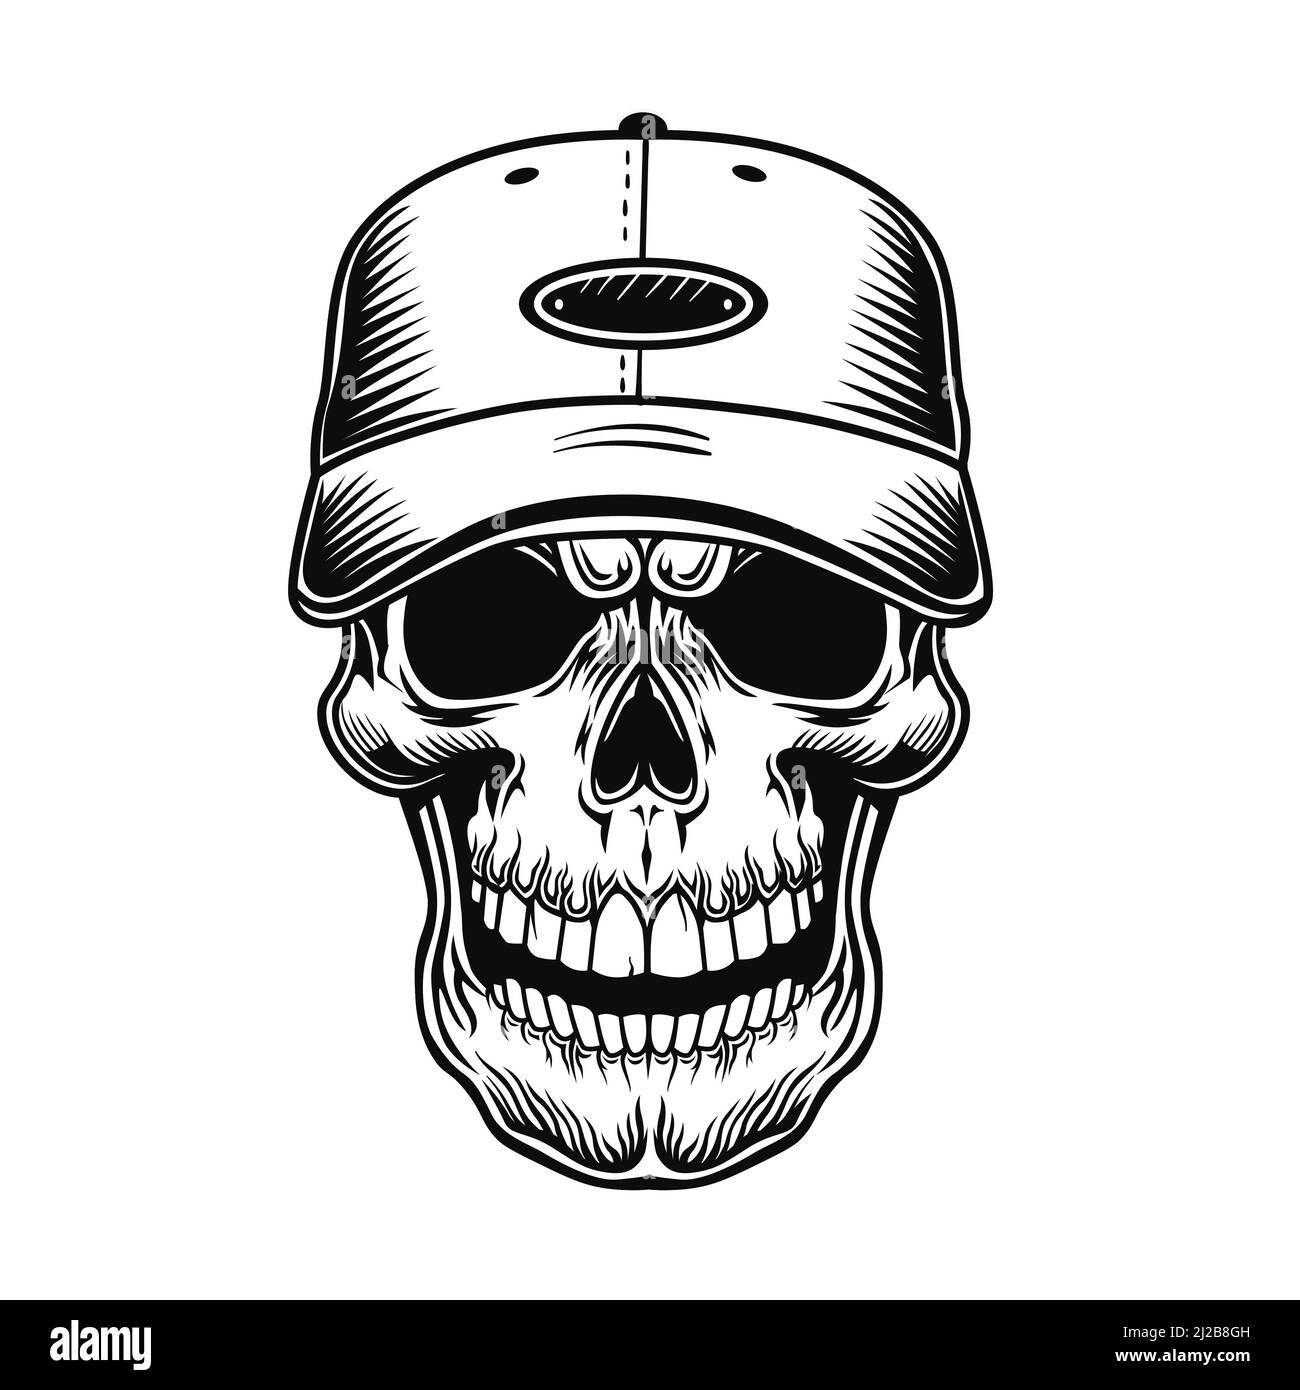 Skull of baseball player vector illustration. Head of character in cap. Headwear concept for sport topic or tattoo template Stock Vector